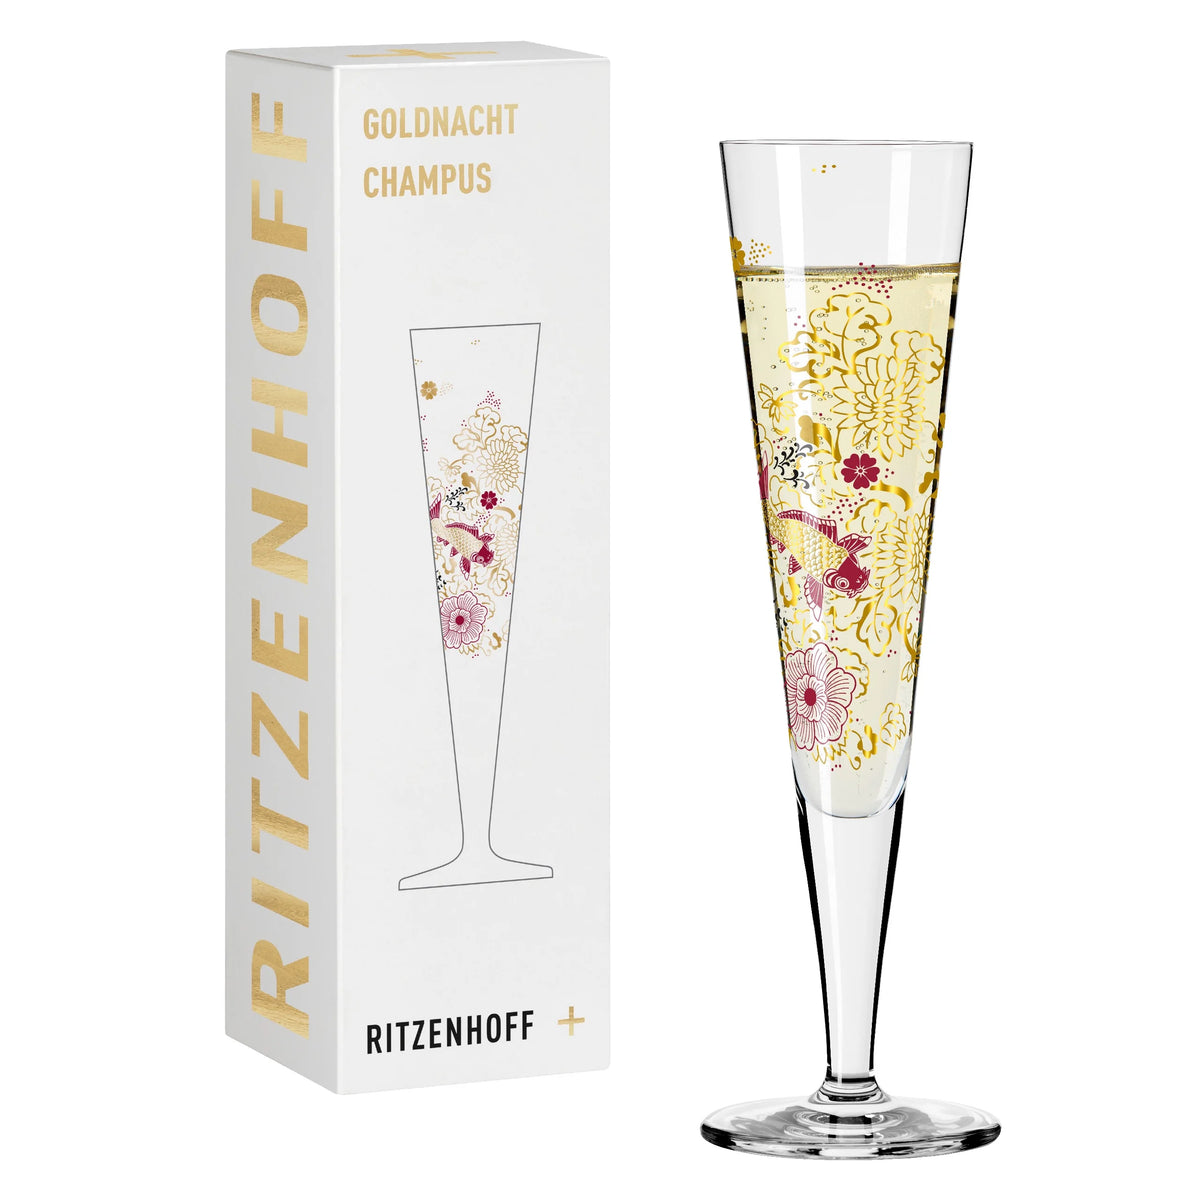 The Ritzenhoff Goldnacht Champagne Glass, 1071023, by Kathrin Stockebrand, presented in an exclusive gift box.